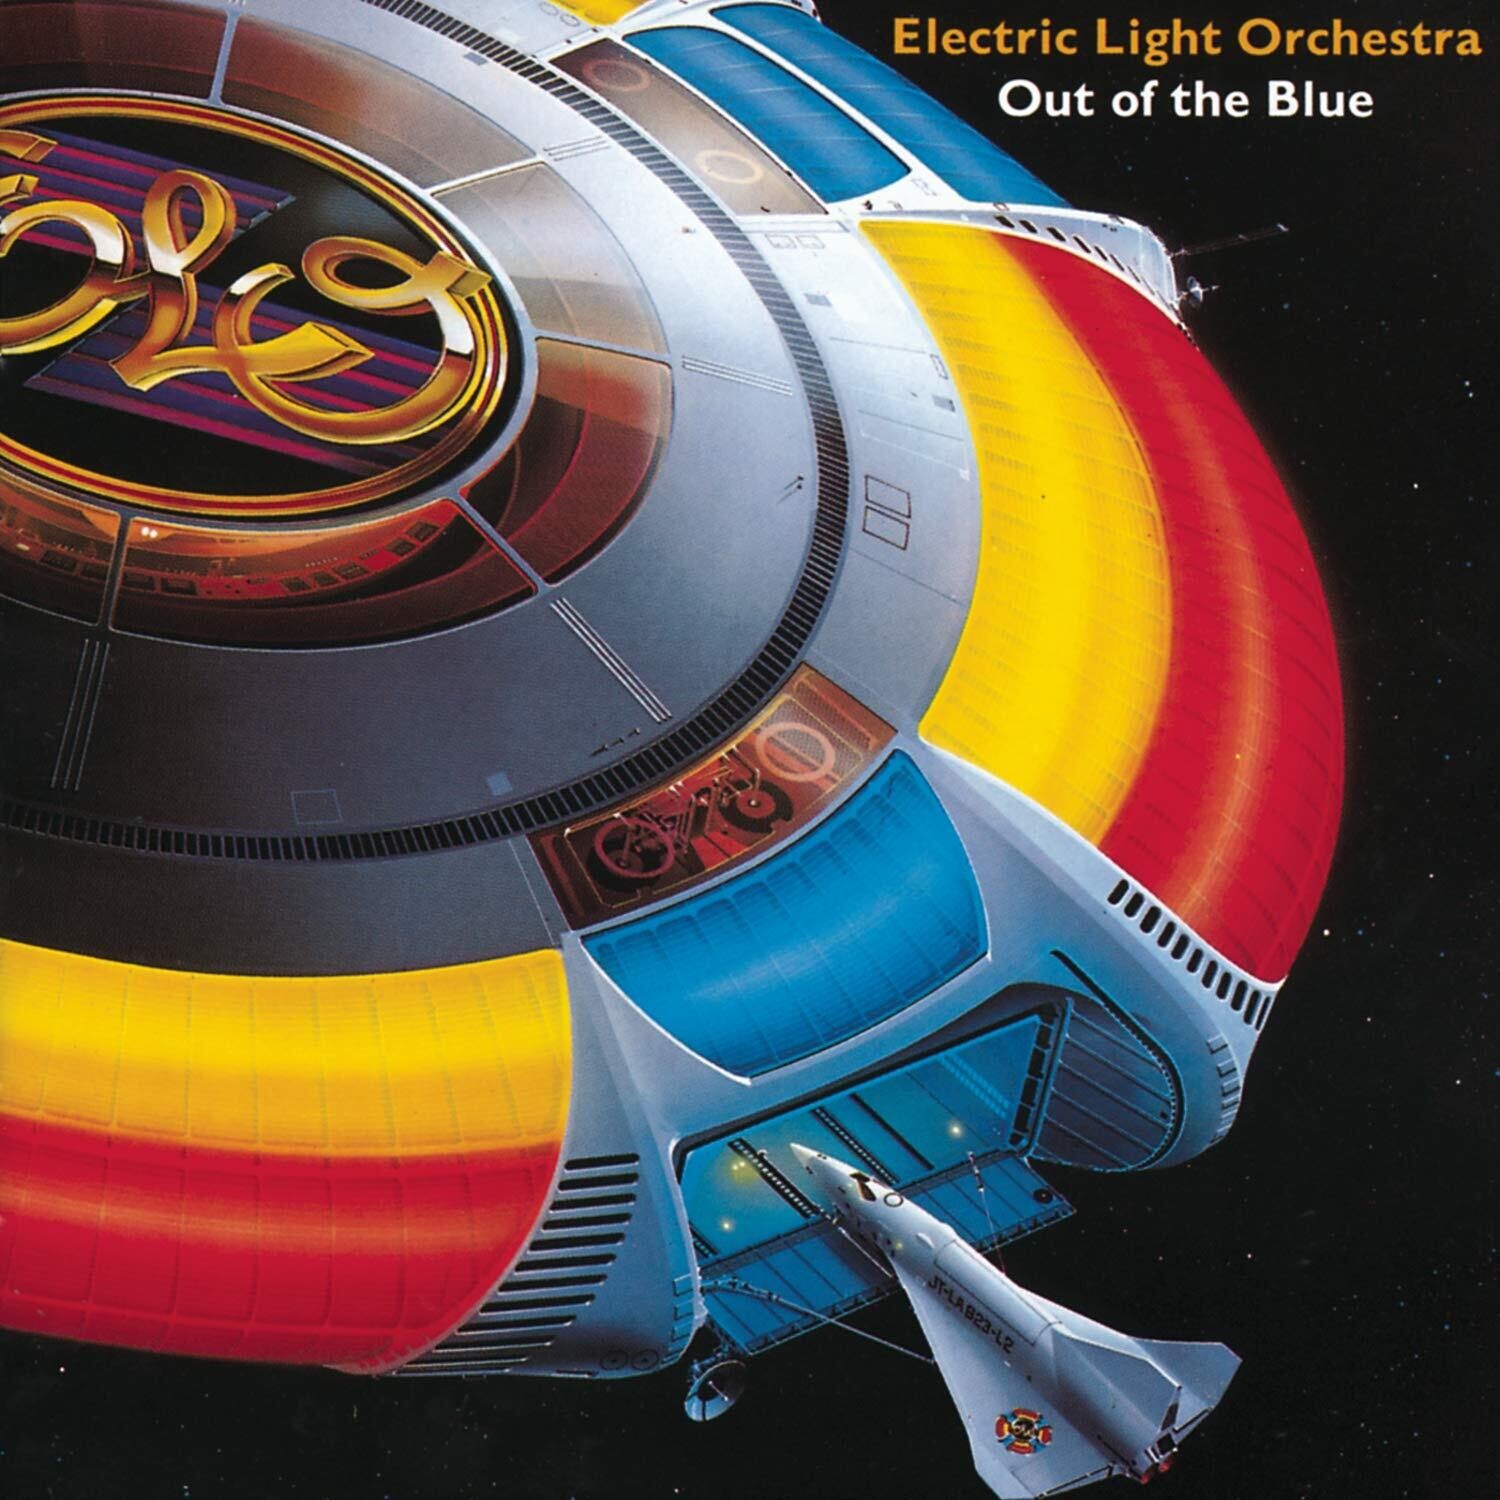 Electric Light Orchestra "Out Of The Blue"